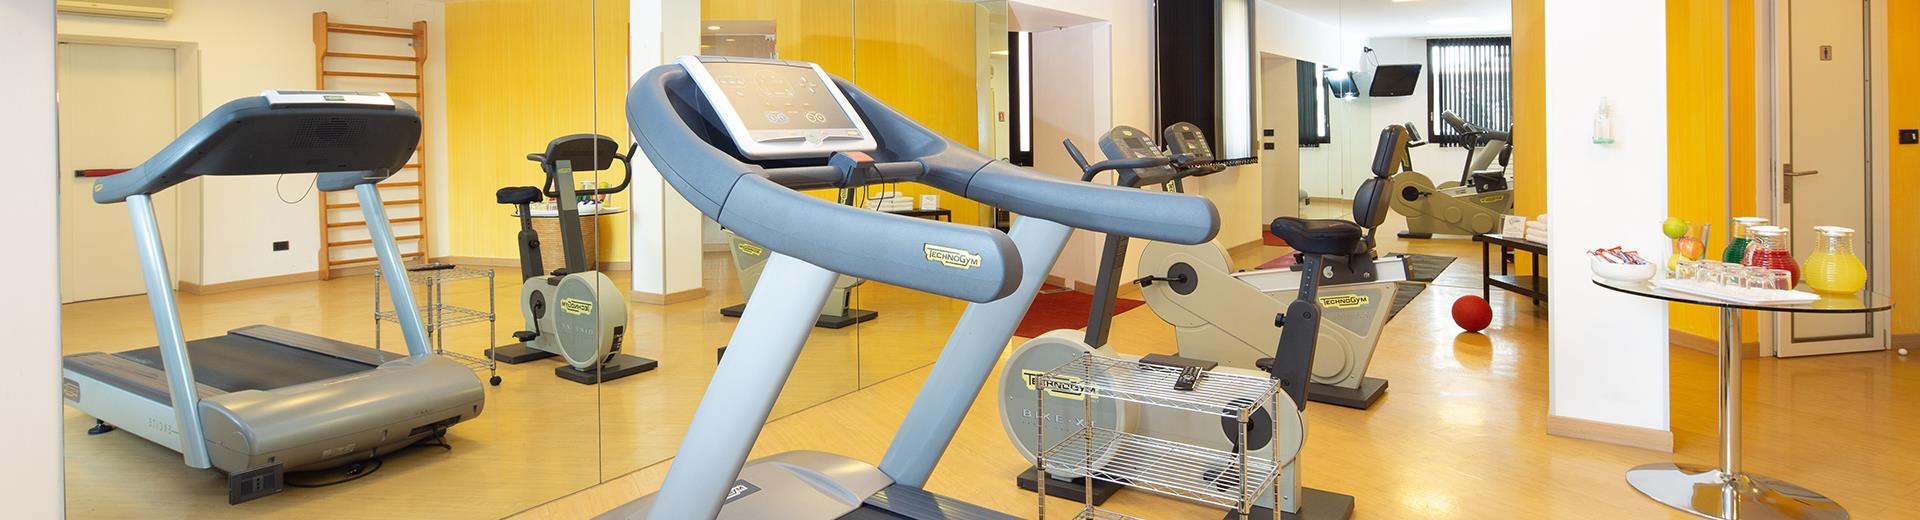 Hotel Biri, modern and comfortable 4-star in Padua, also has a fitness area!